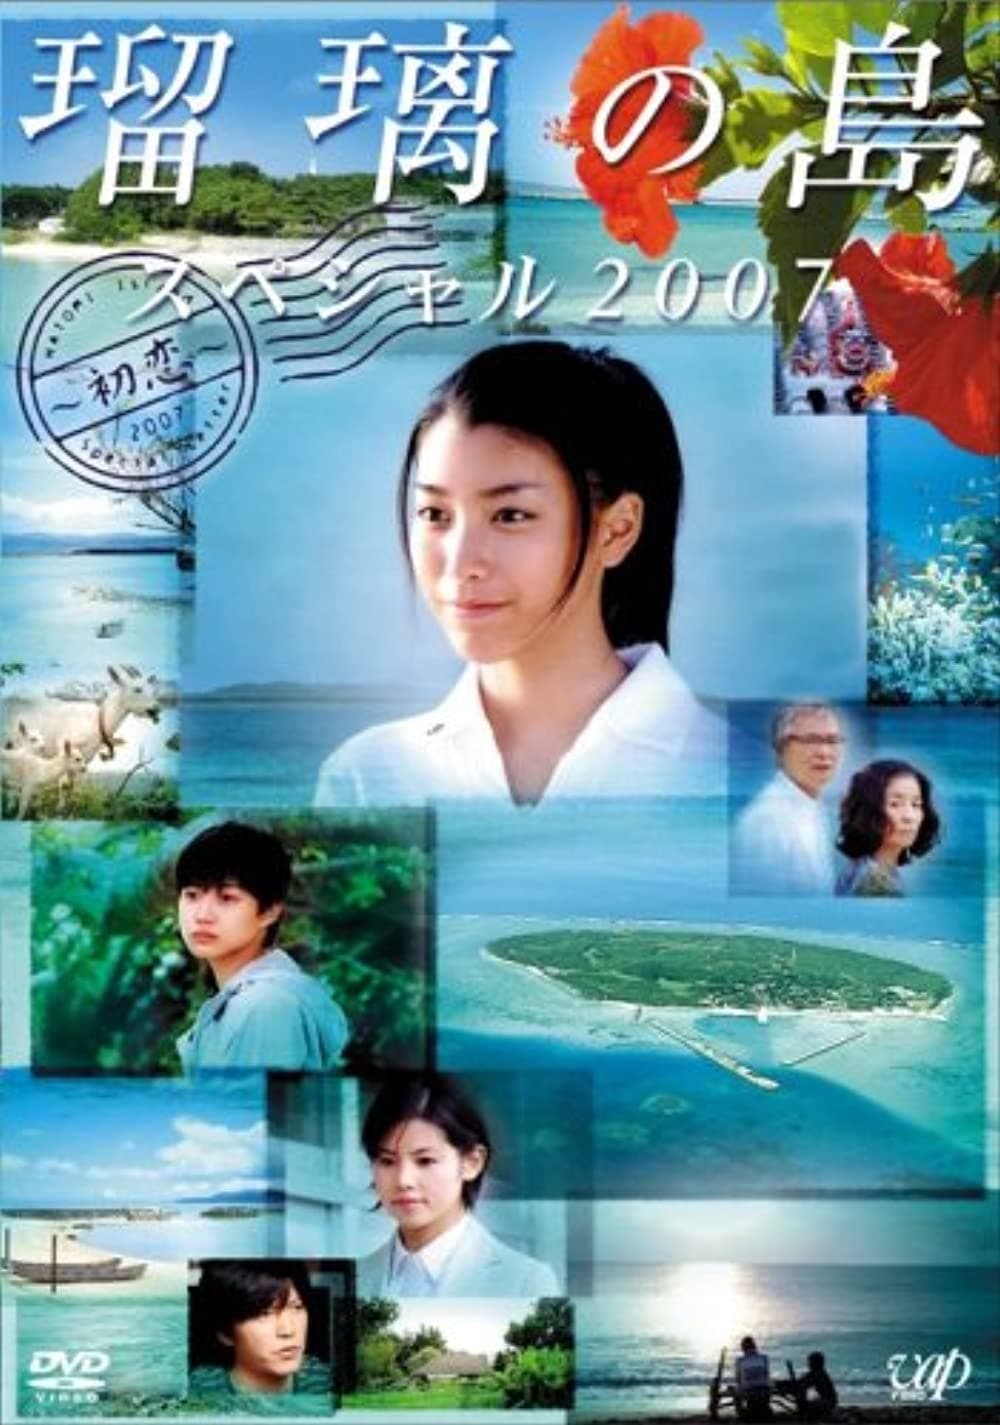 Ruri's Island Special 2007: First Love